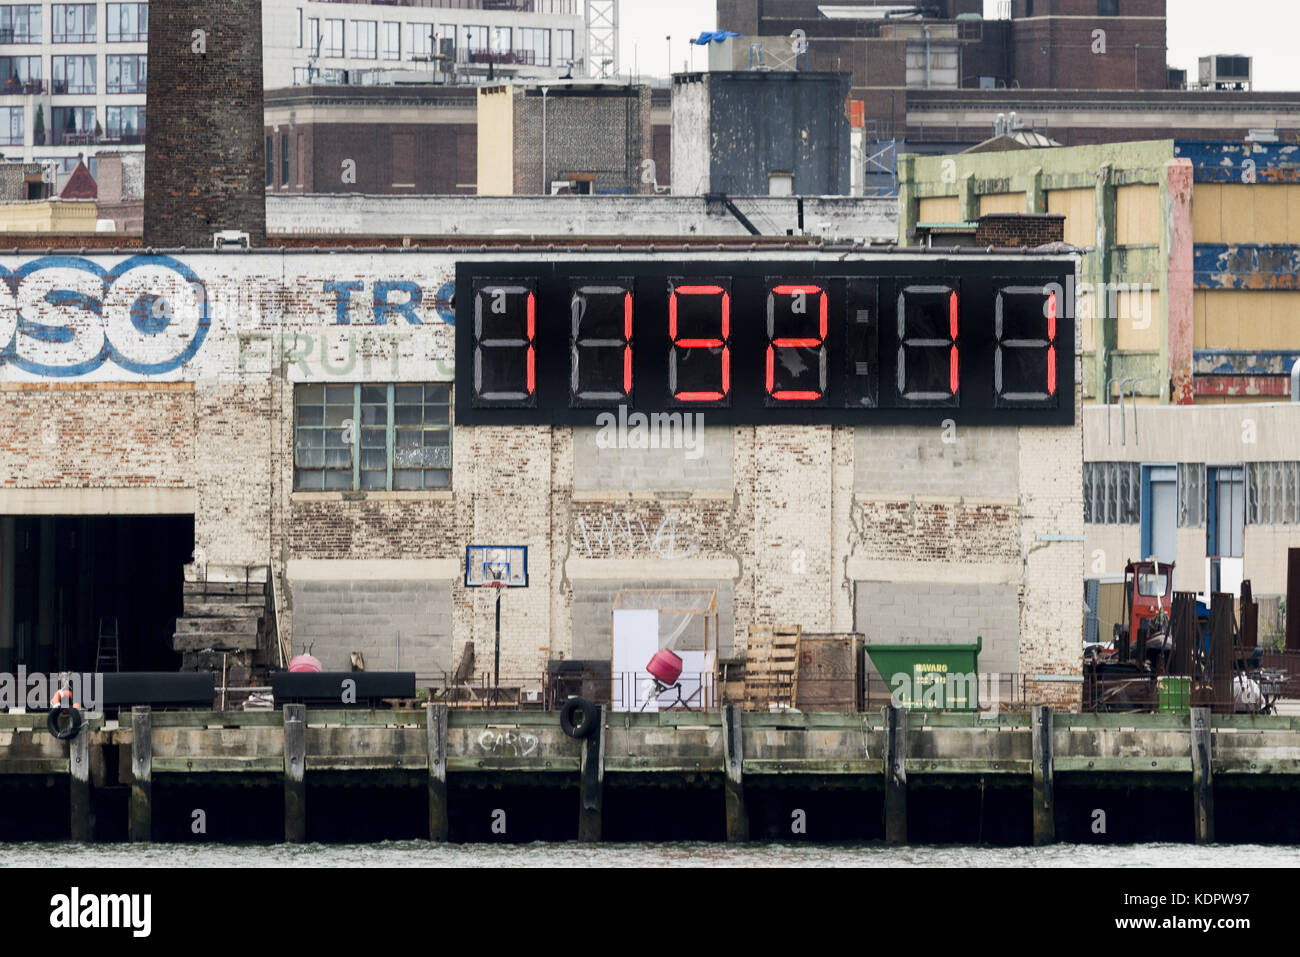 Queens, NY, USA. 15th Oct, 2017. Very large countdown clock showing the number of days and hours left until the next presidential inauguration on January 20, 2021. The clock is located in the Long Island City section of Queens in New York City facing the East River and Manhattan and is easily visible from a large part of the east side of Manhattan. Photo taken on October 15, 2017 which is, as shown in the photo, 1,192 days and 11 hours until the next presidential inauguration. Credit: Michael Brochstein/ZUMA Wire/Alamy Live News Stock Photo